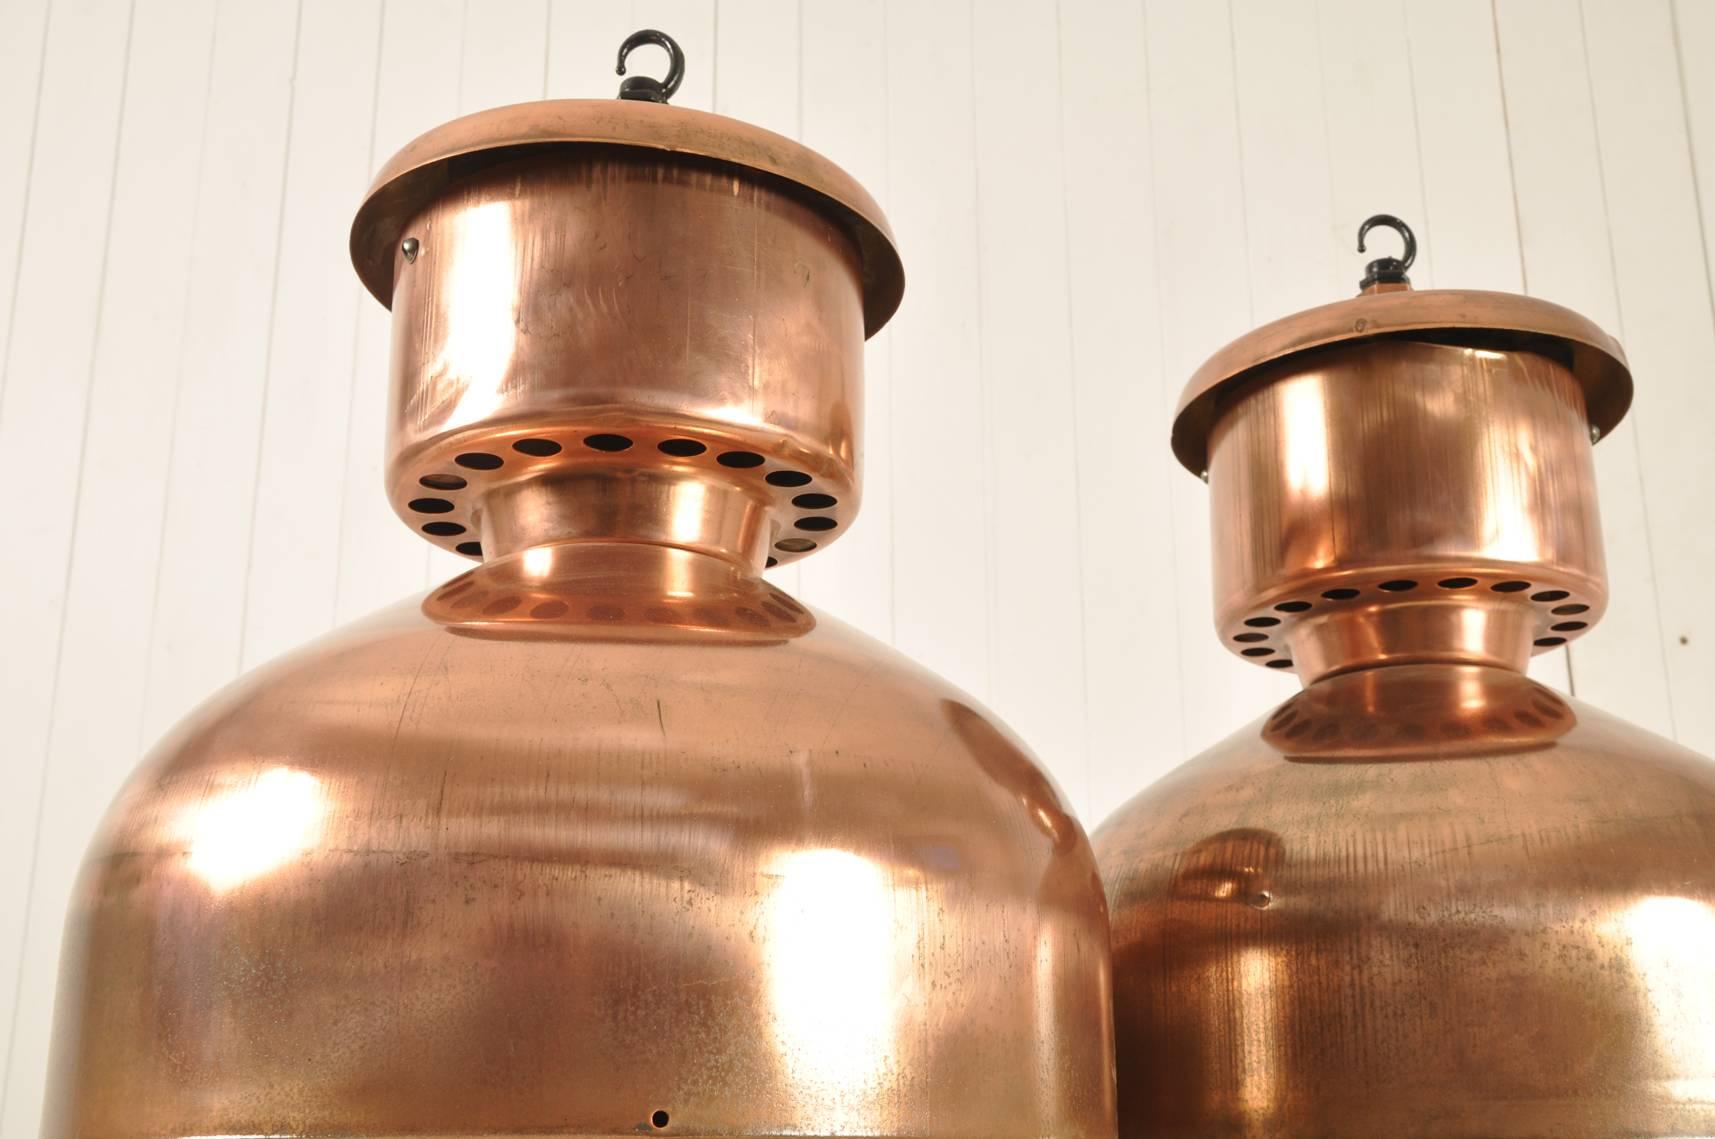 Czech Copper-Plated Industrial Pendant Lights For Sale